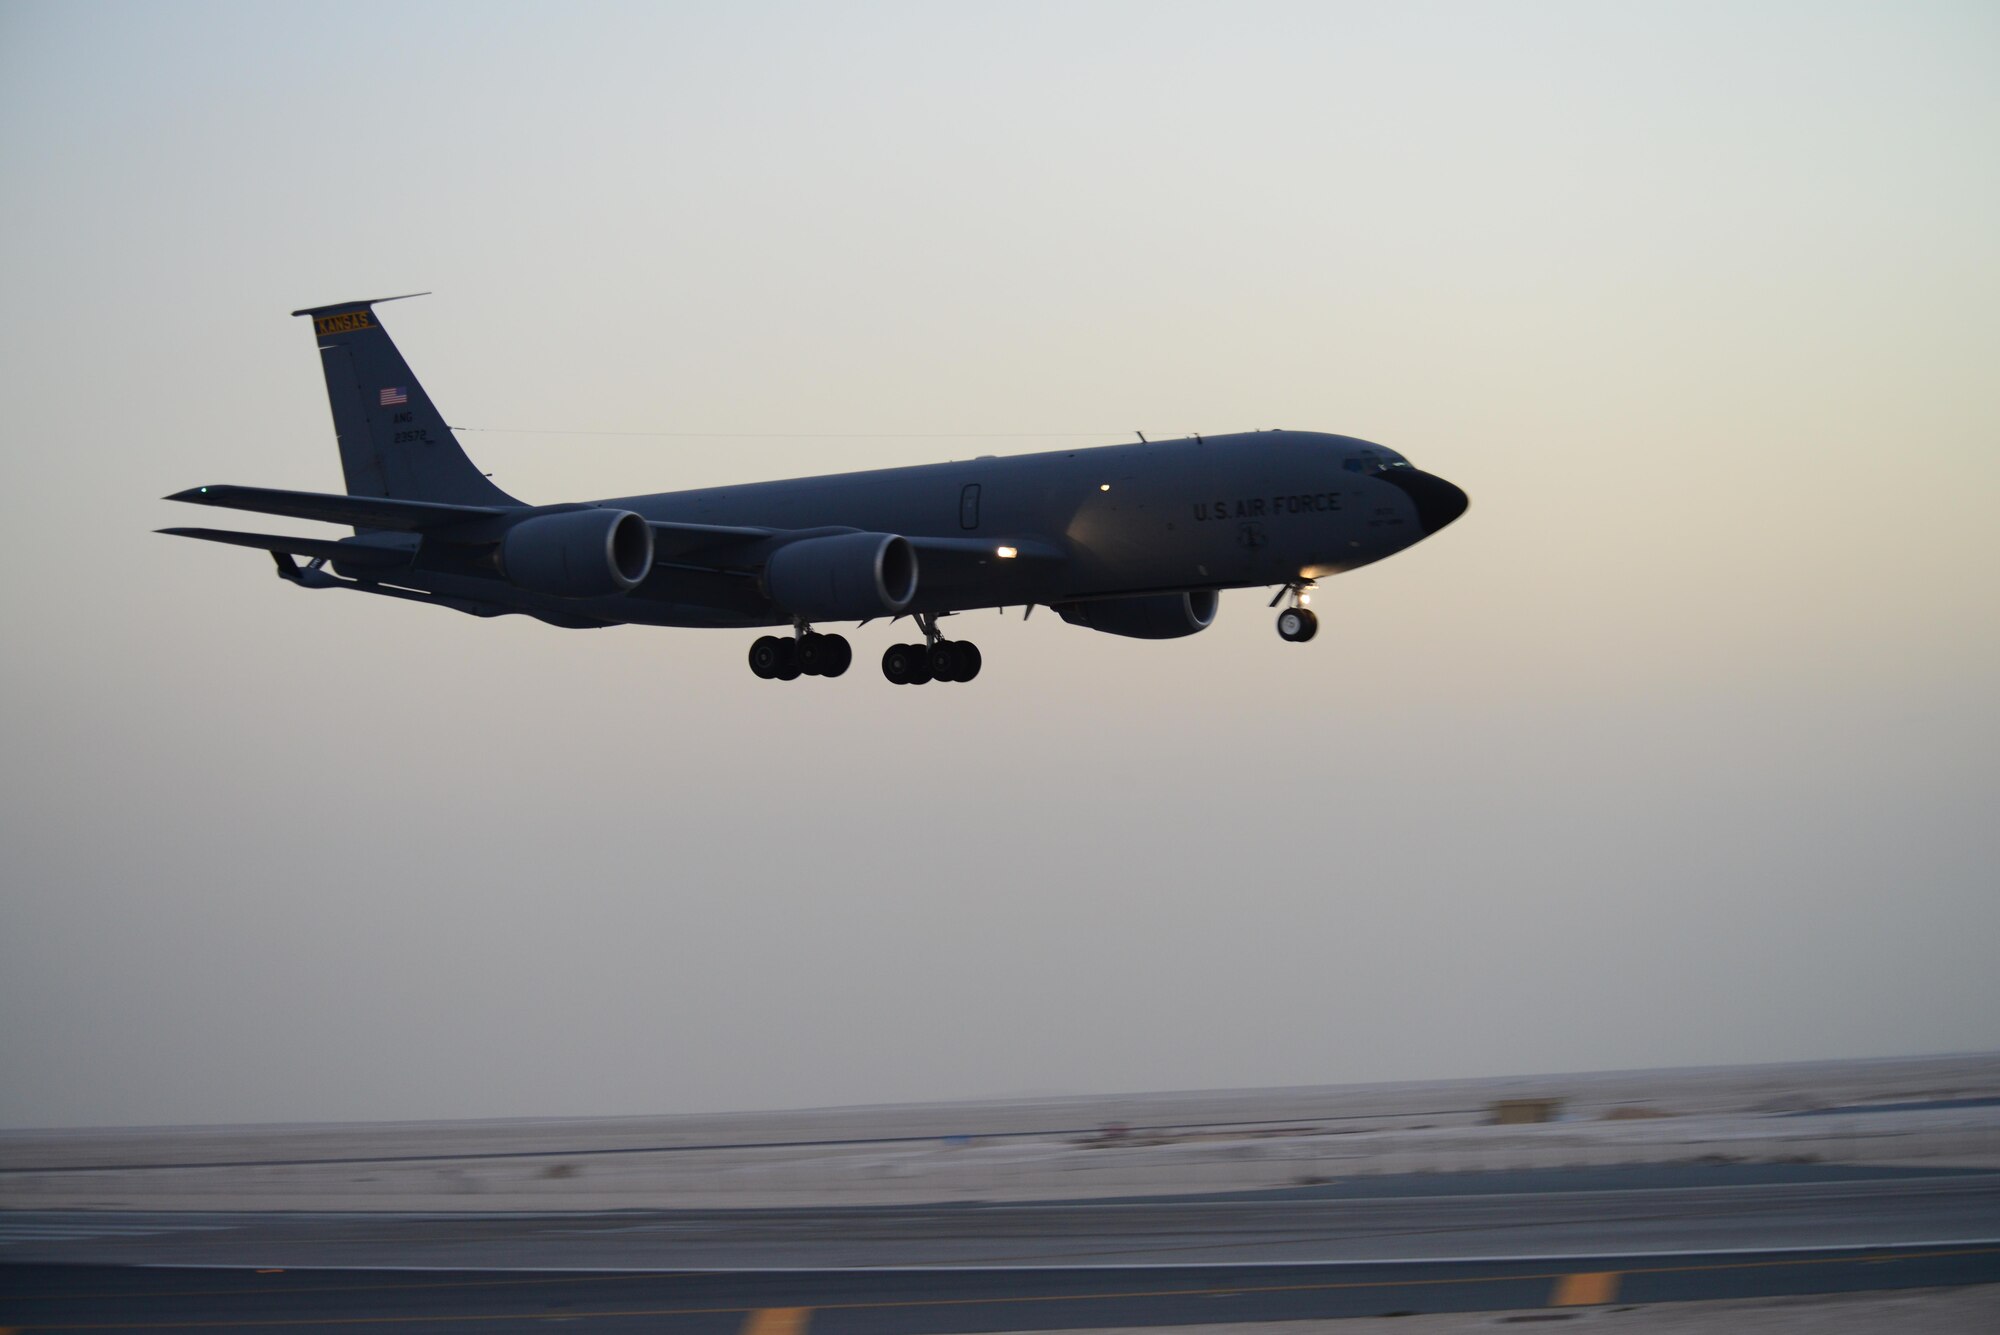 A KC-135 Stratotanker prepares to land on the flightline, Feb. 26, 2015, at Al Udeid Air Base, Qatar. Air refueling provided by the 340th Expeditionary Air Refueling Squadron’s KC-135 Stratotankers, which supports all mission sets, gives aircraft the reach capability to accomplish the Combined Forces Air Component Commander’s air campaign objectives in the region. (U.S. Air Force photo by Senior Airman Kia Atkins)